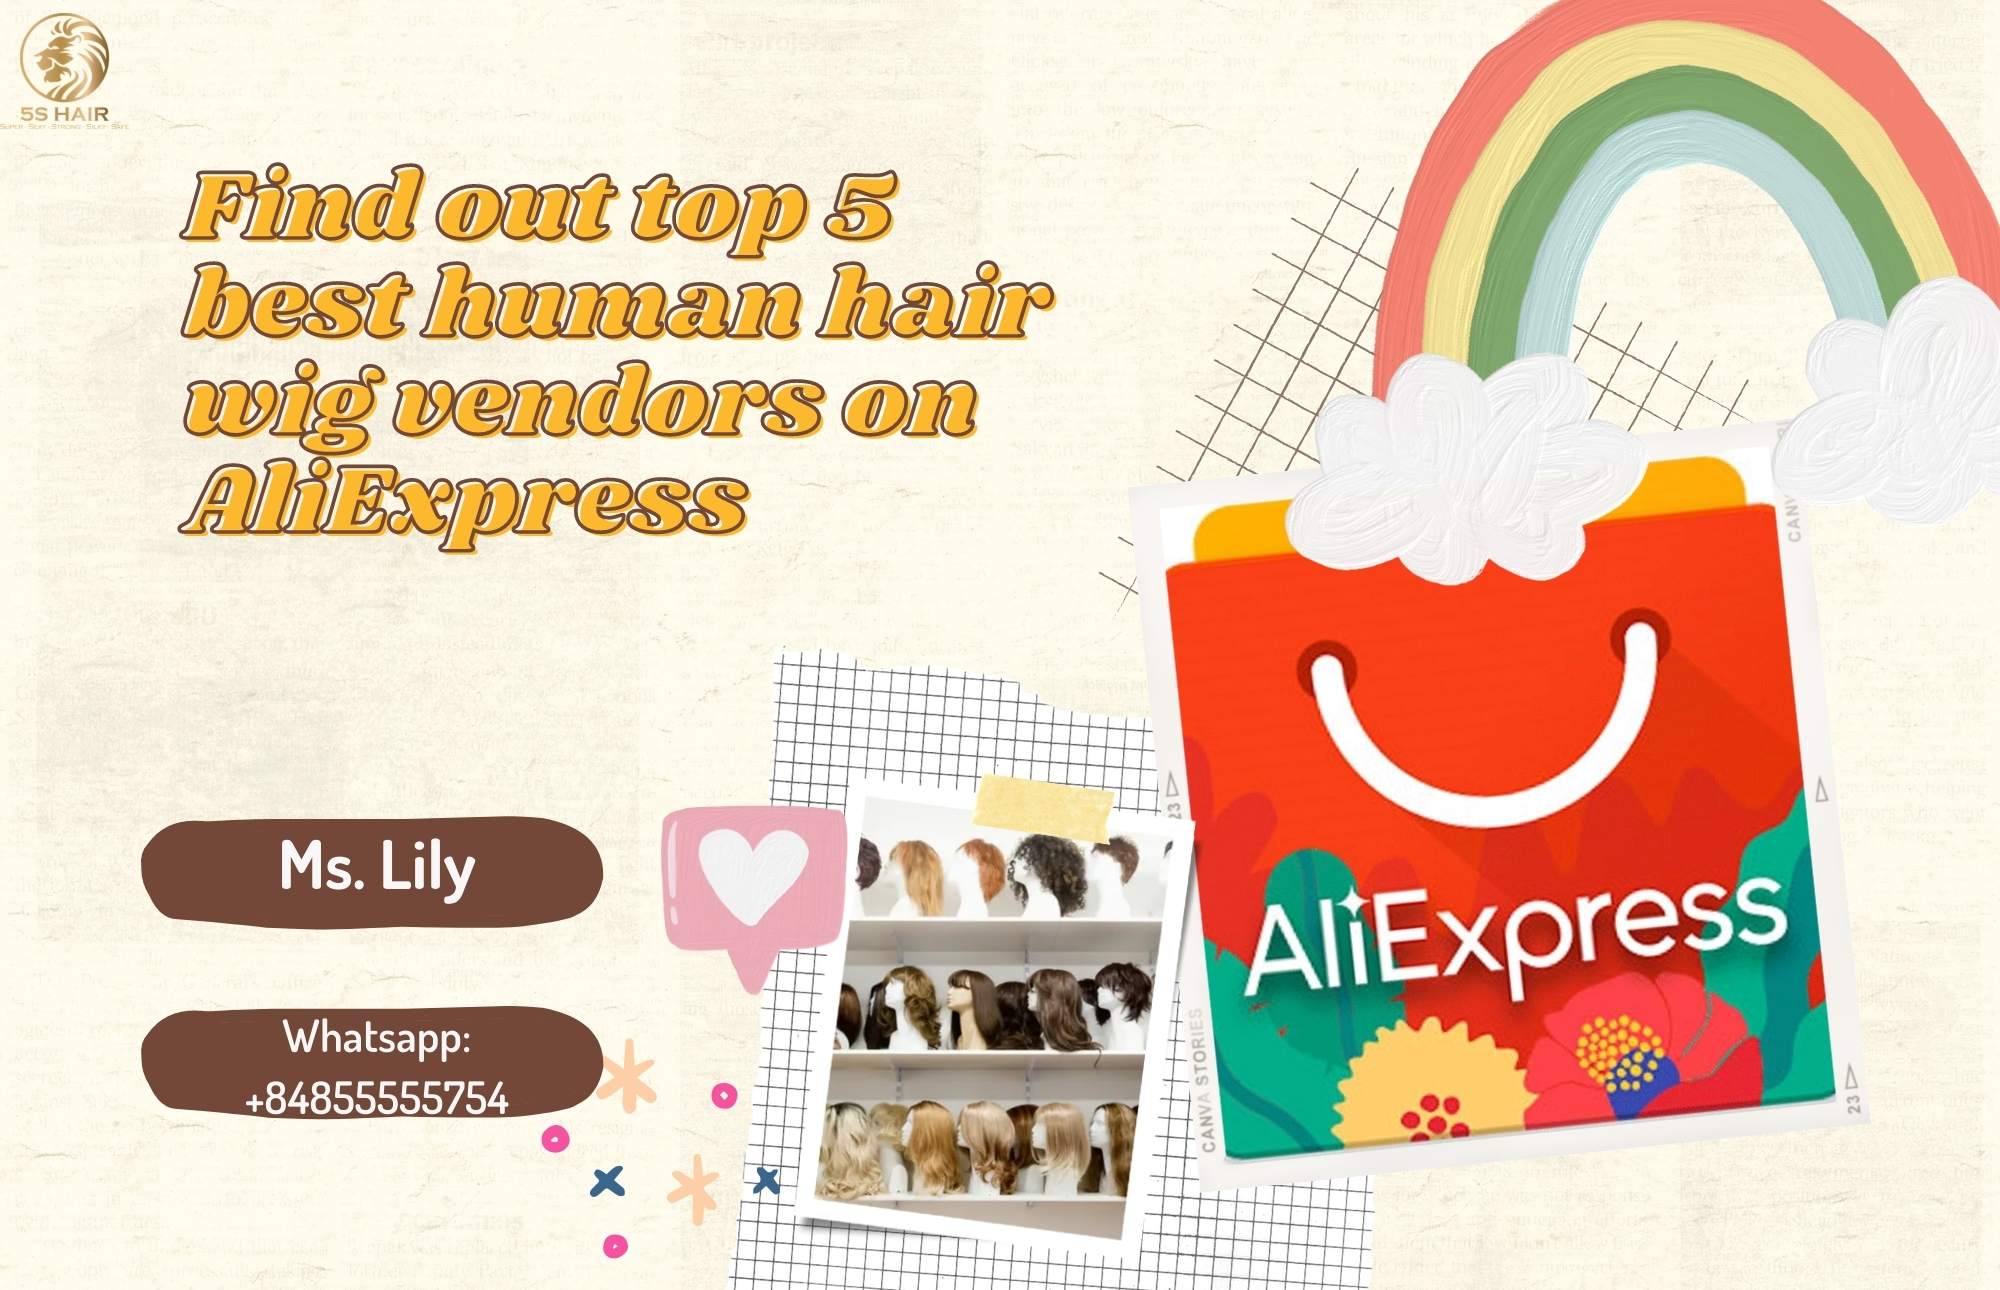 10. Trusted Blonde 613 Hair Vendors on AliExpress - wide 1